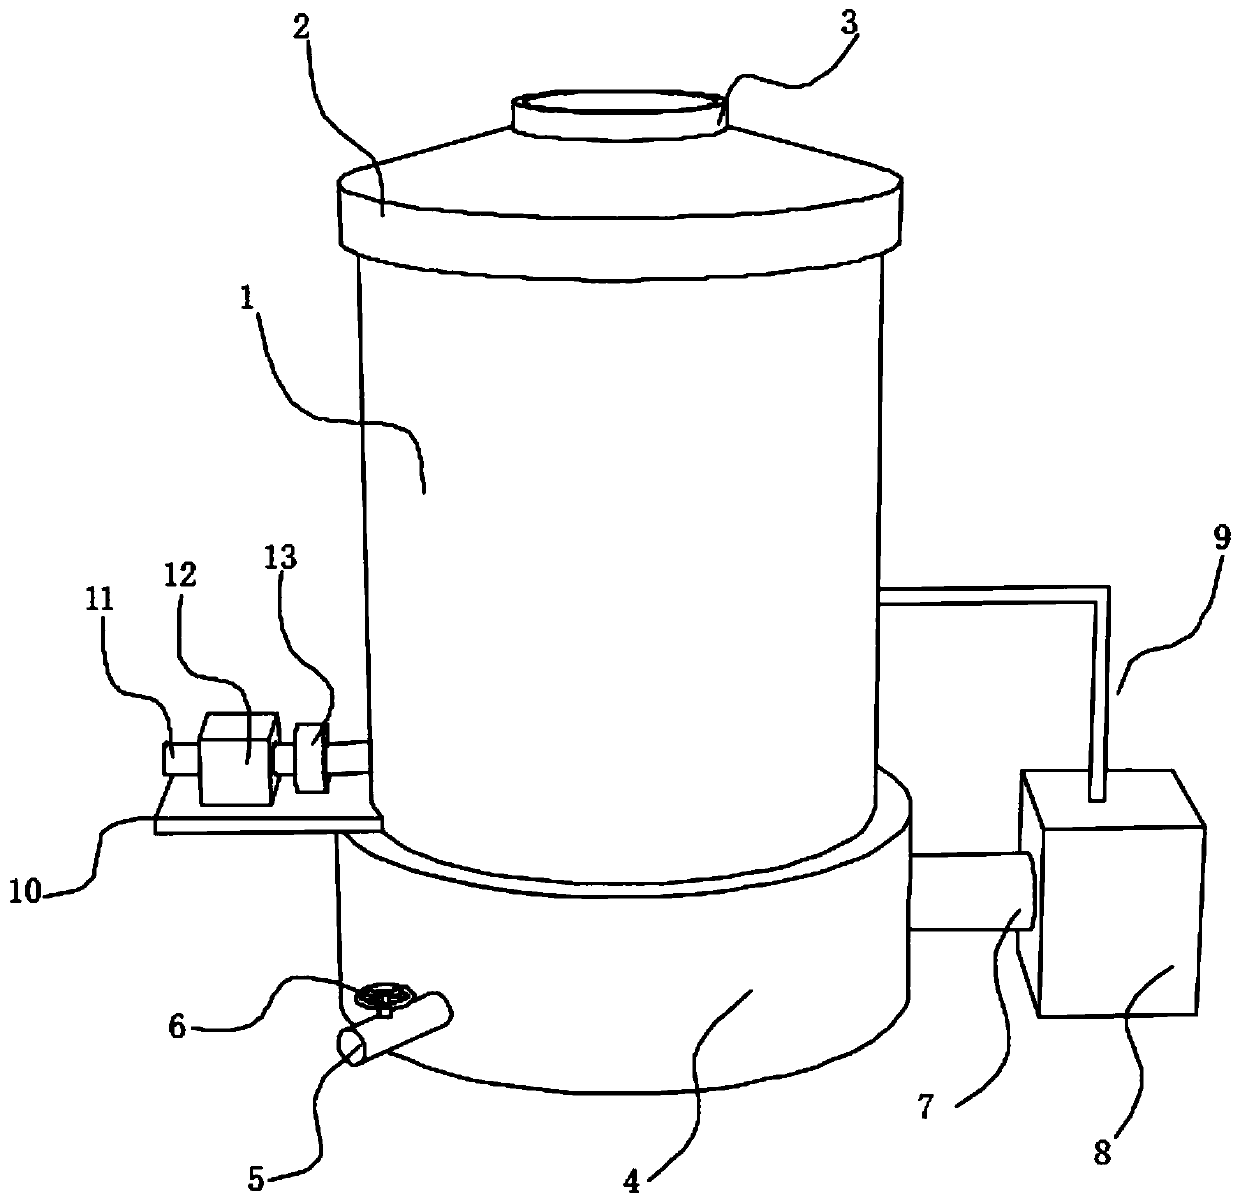 Purification tower for atmospheric pollution treatment